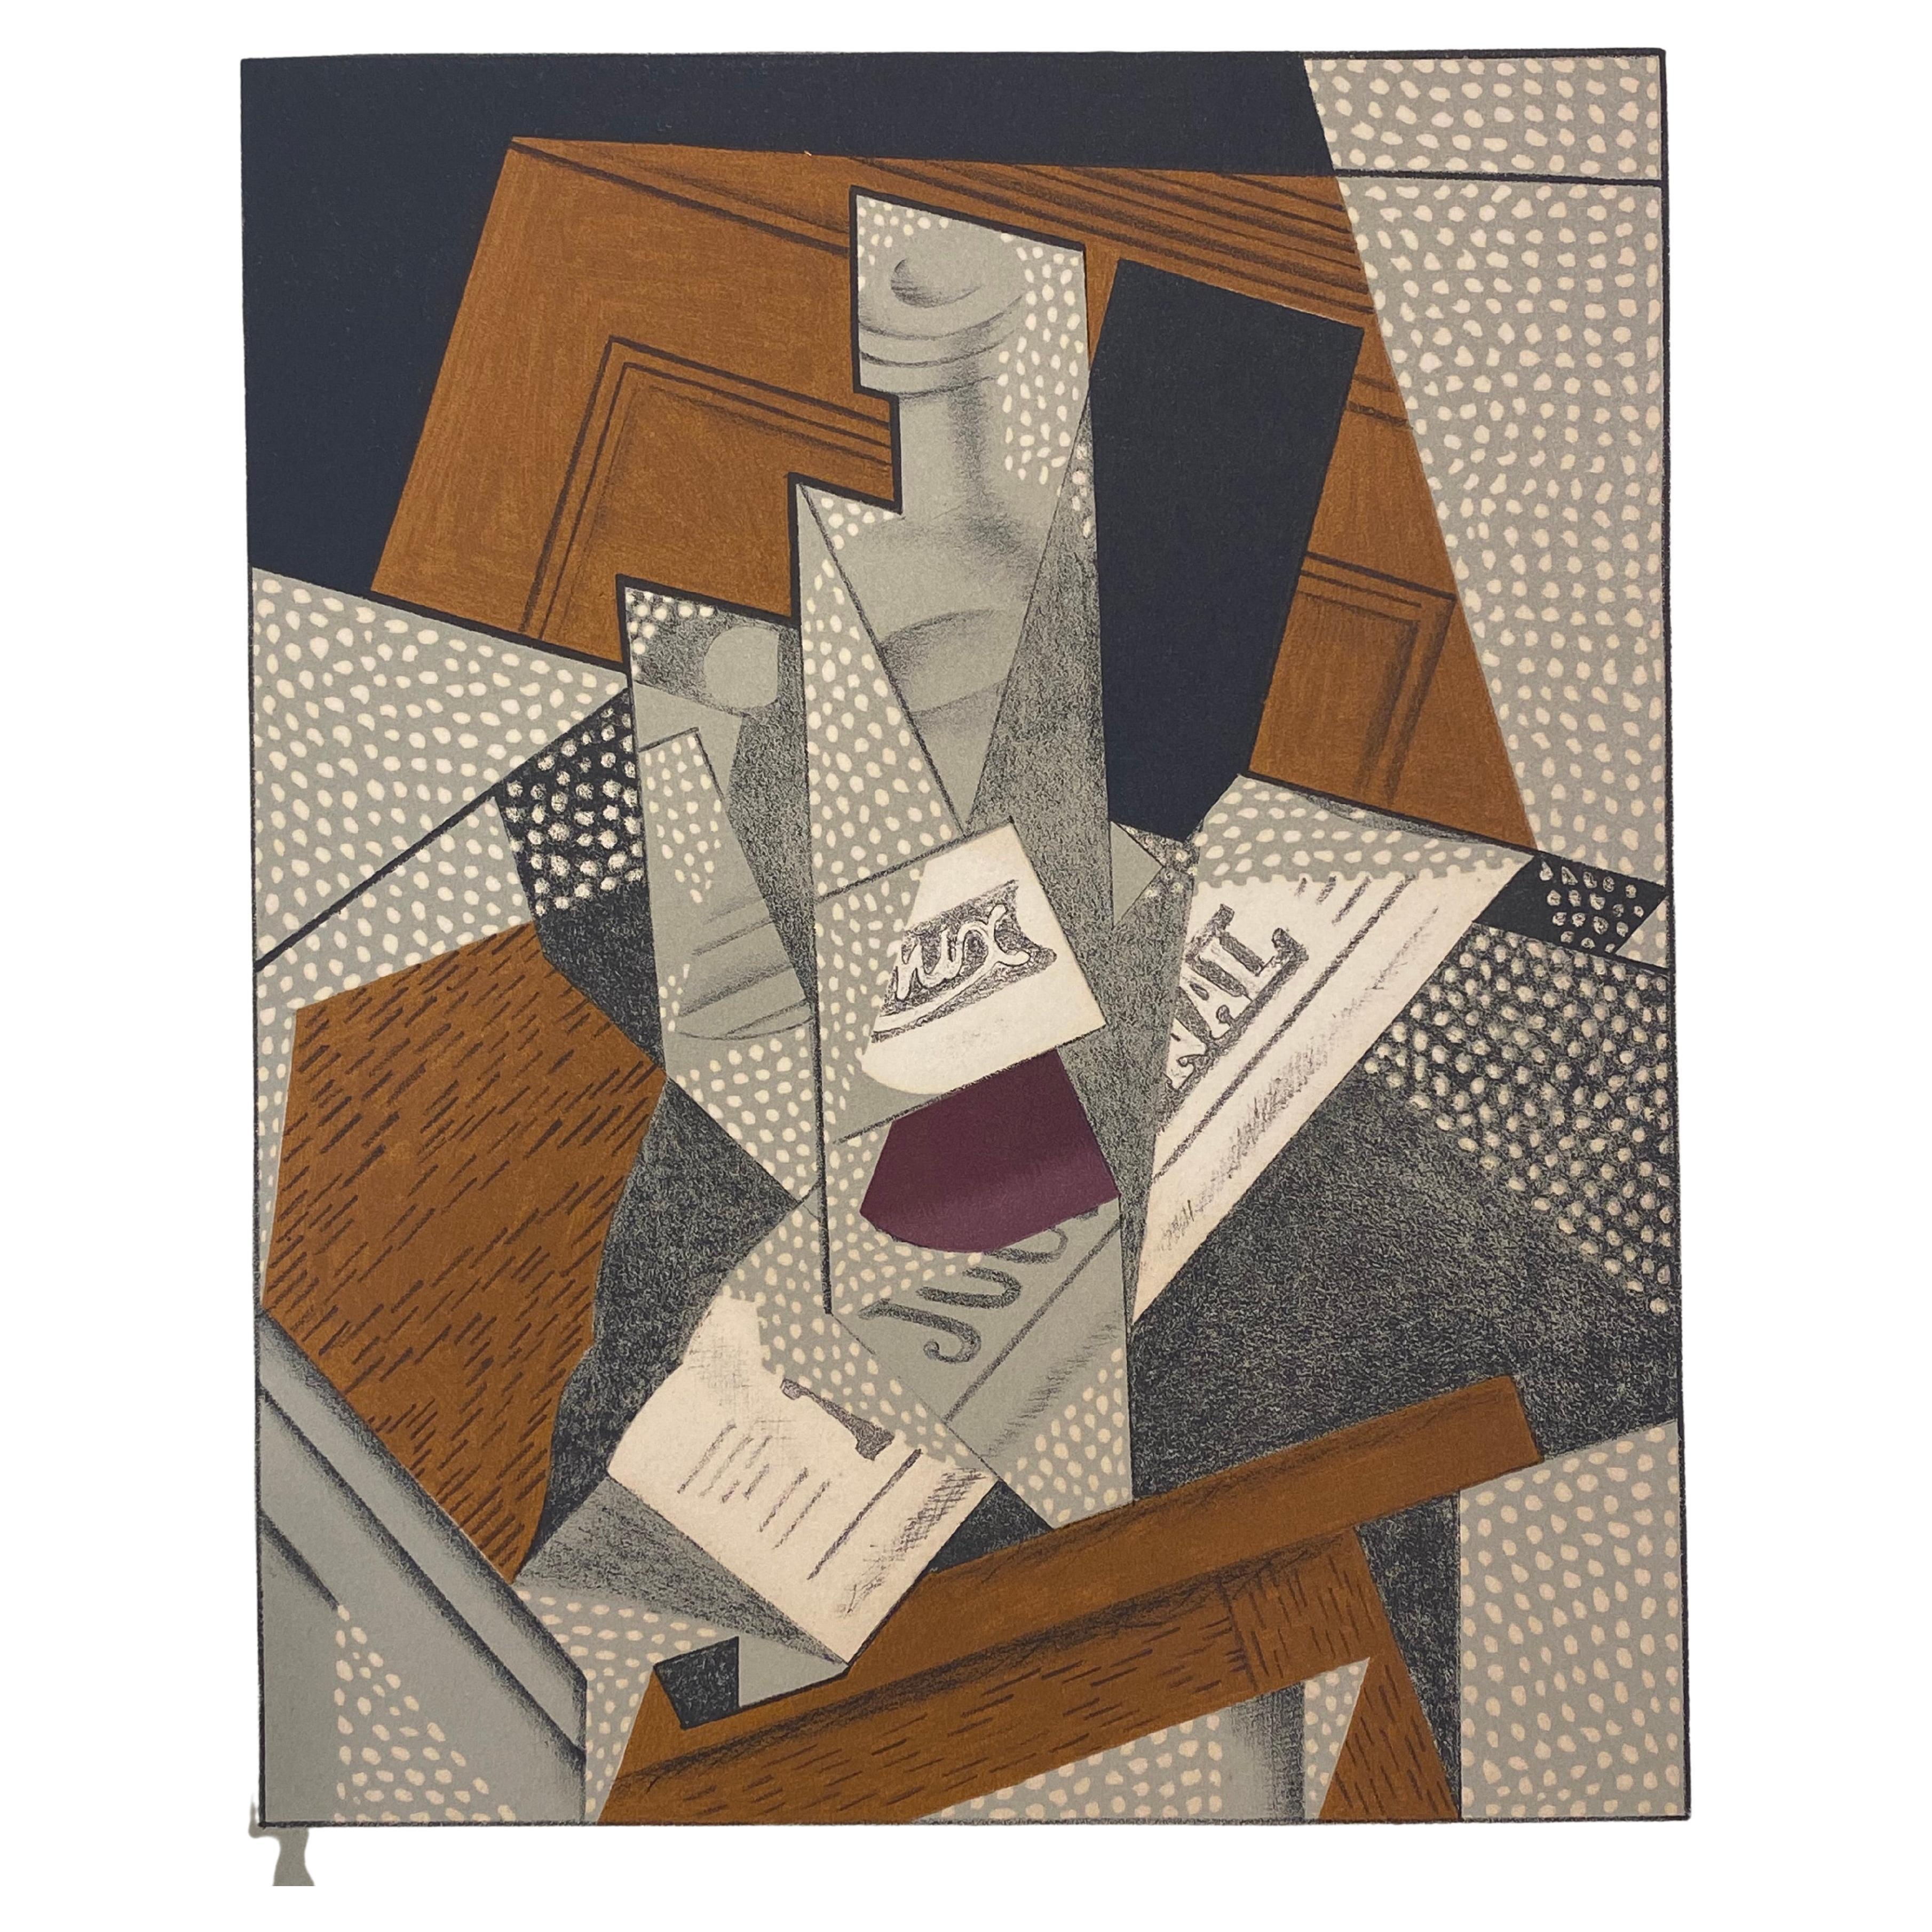 "The Bottle" by Juan Gris  Lithograph on cardboard For Sale